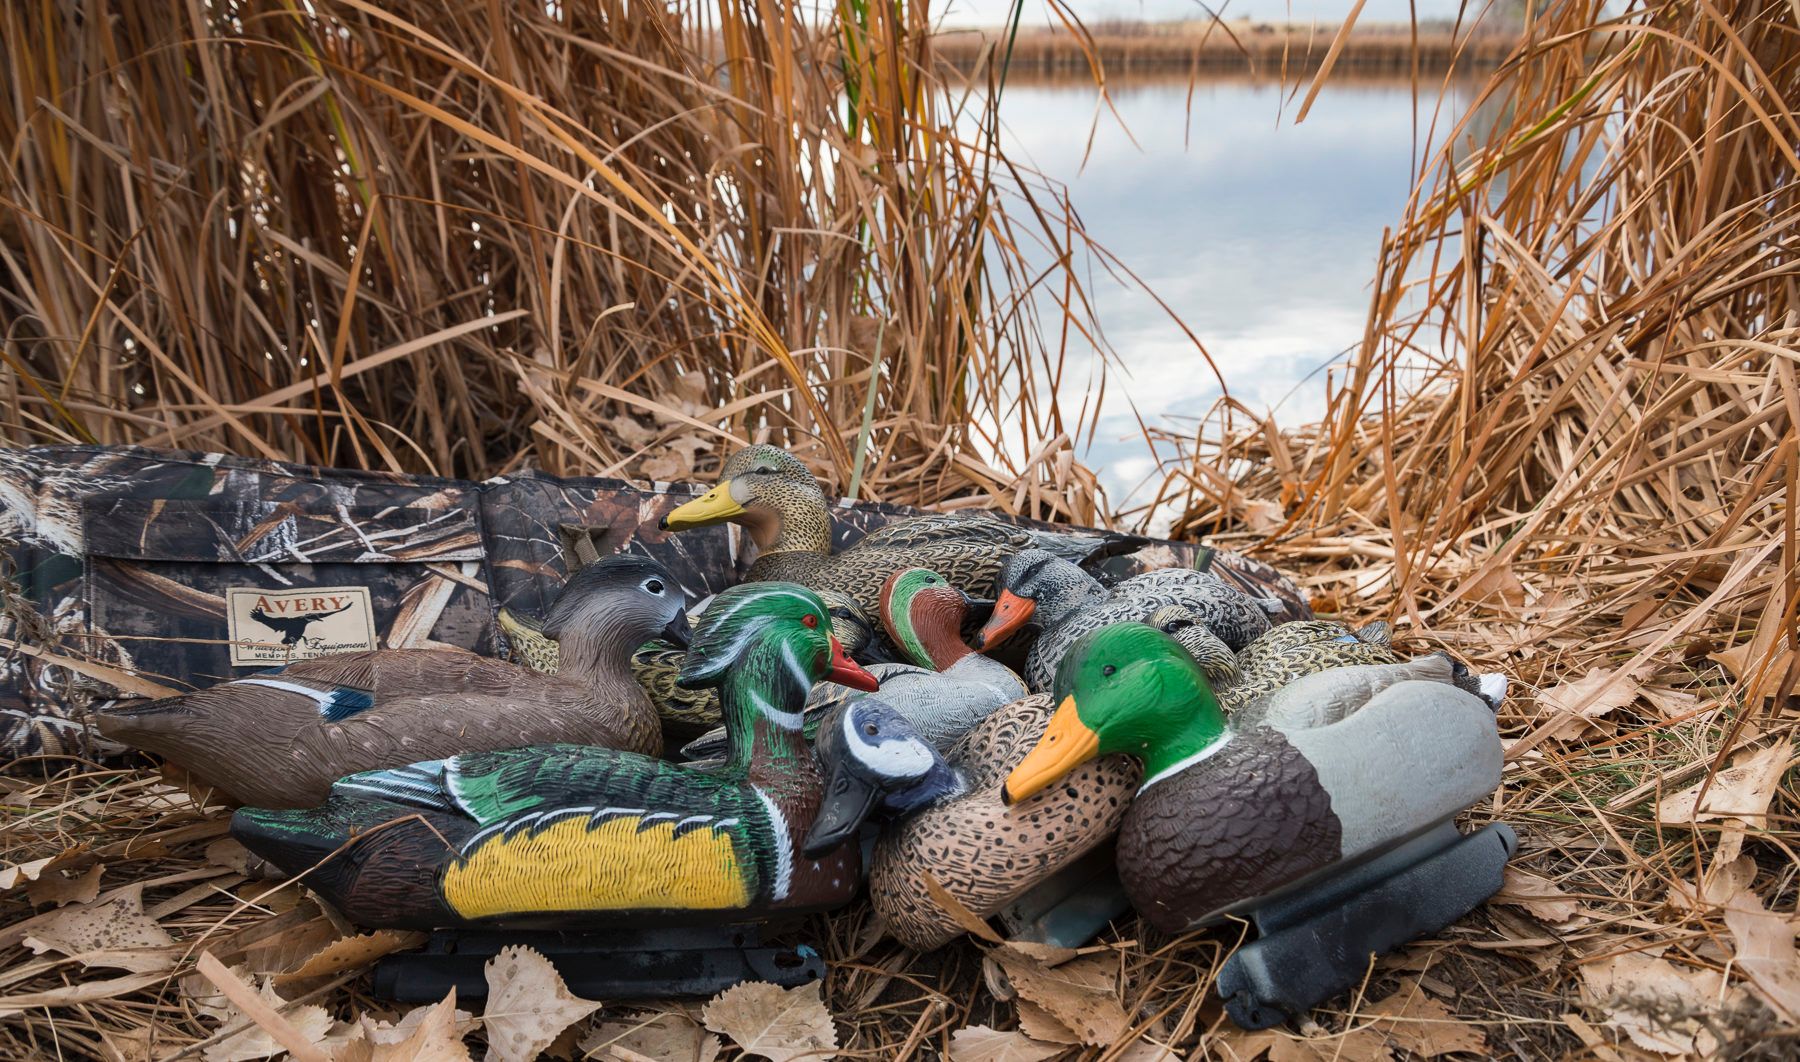 A field adorned with decoy ducks, surrounded by a serene pond.